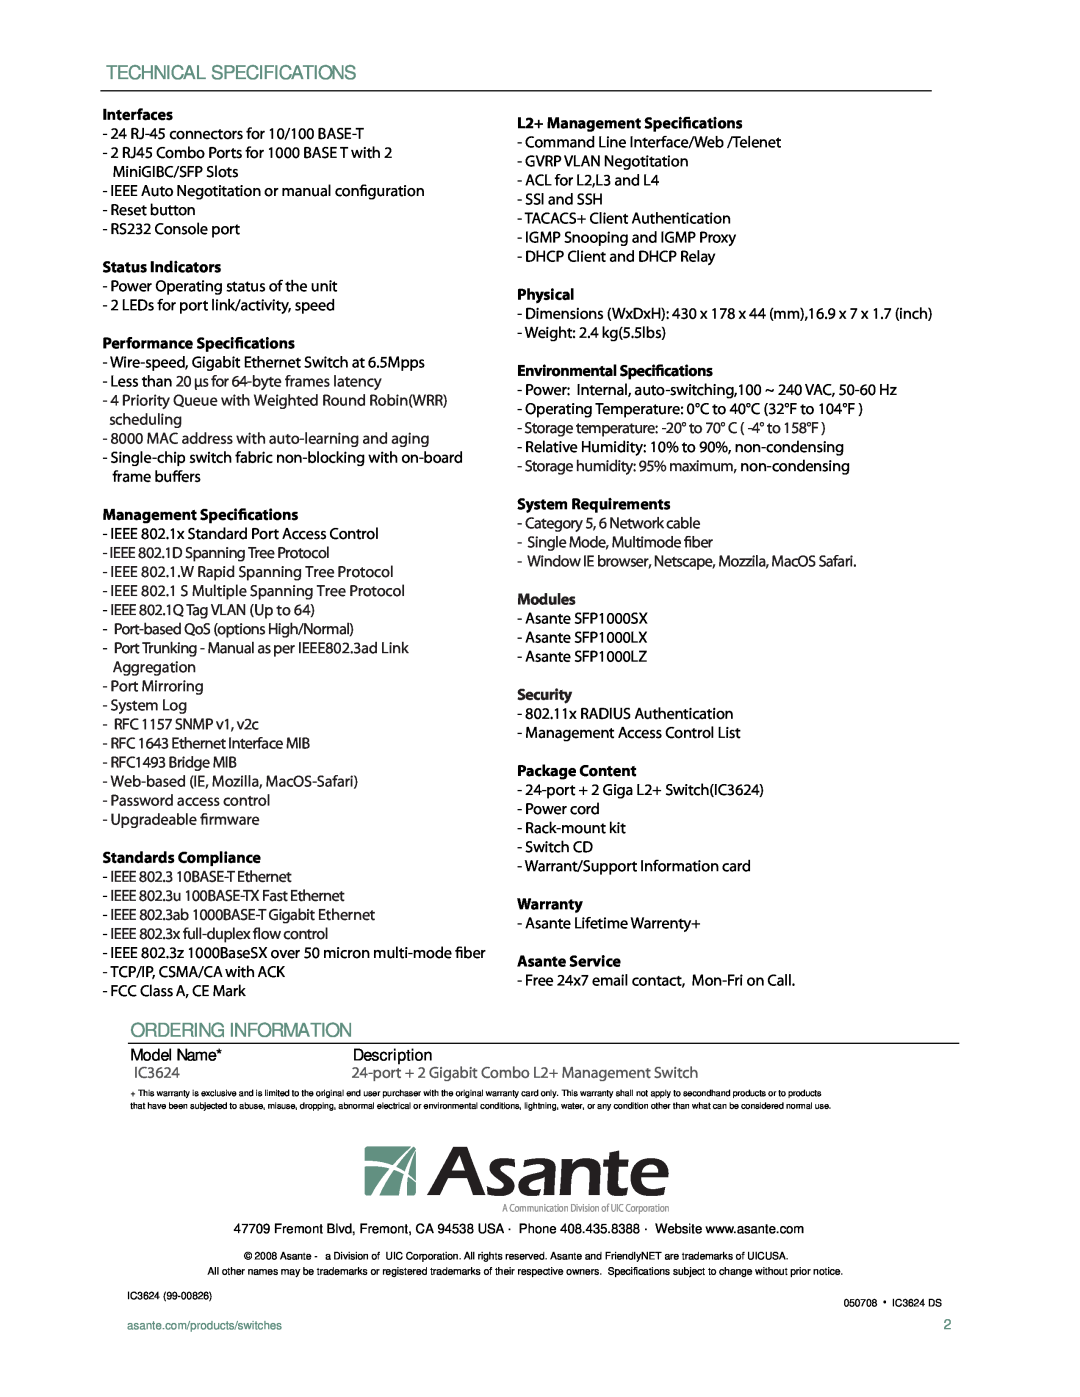 Asante Technologies IC3624 Technical Specifications, Ordering Information, Model Name, Description, Modules, Security 